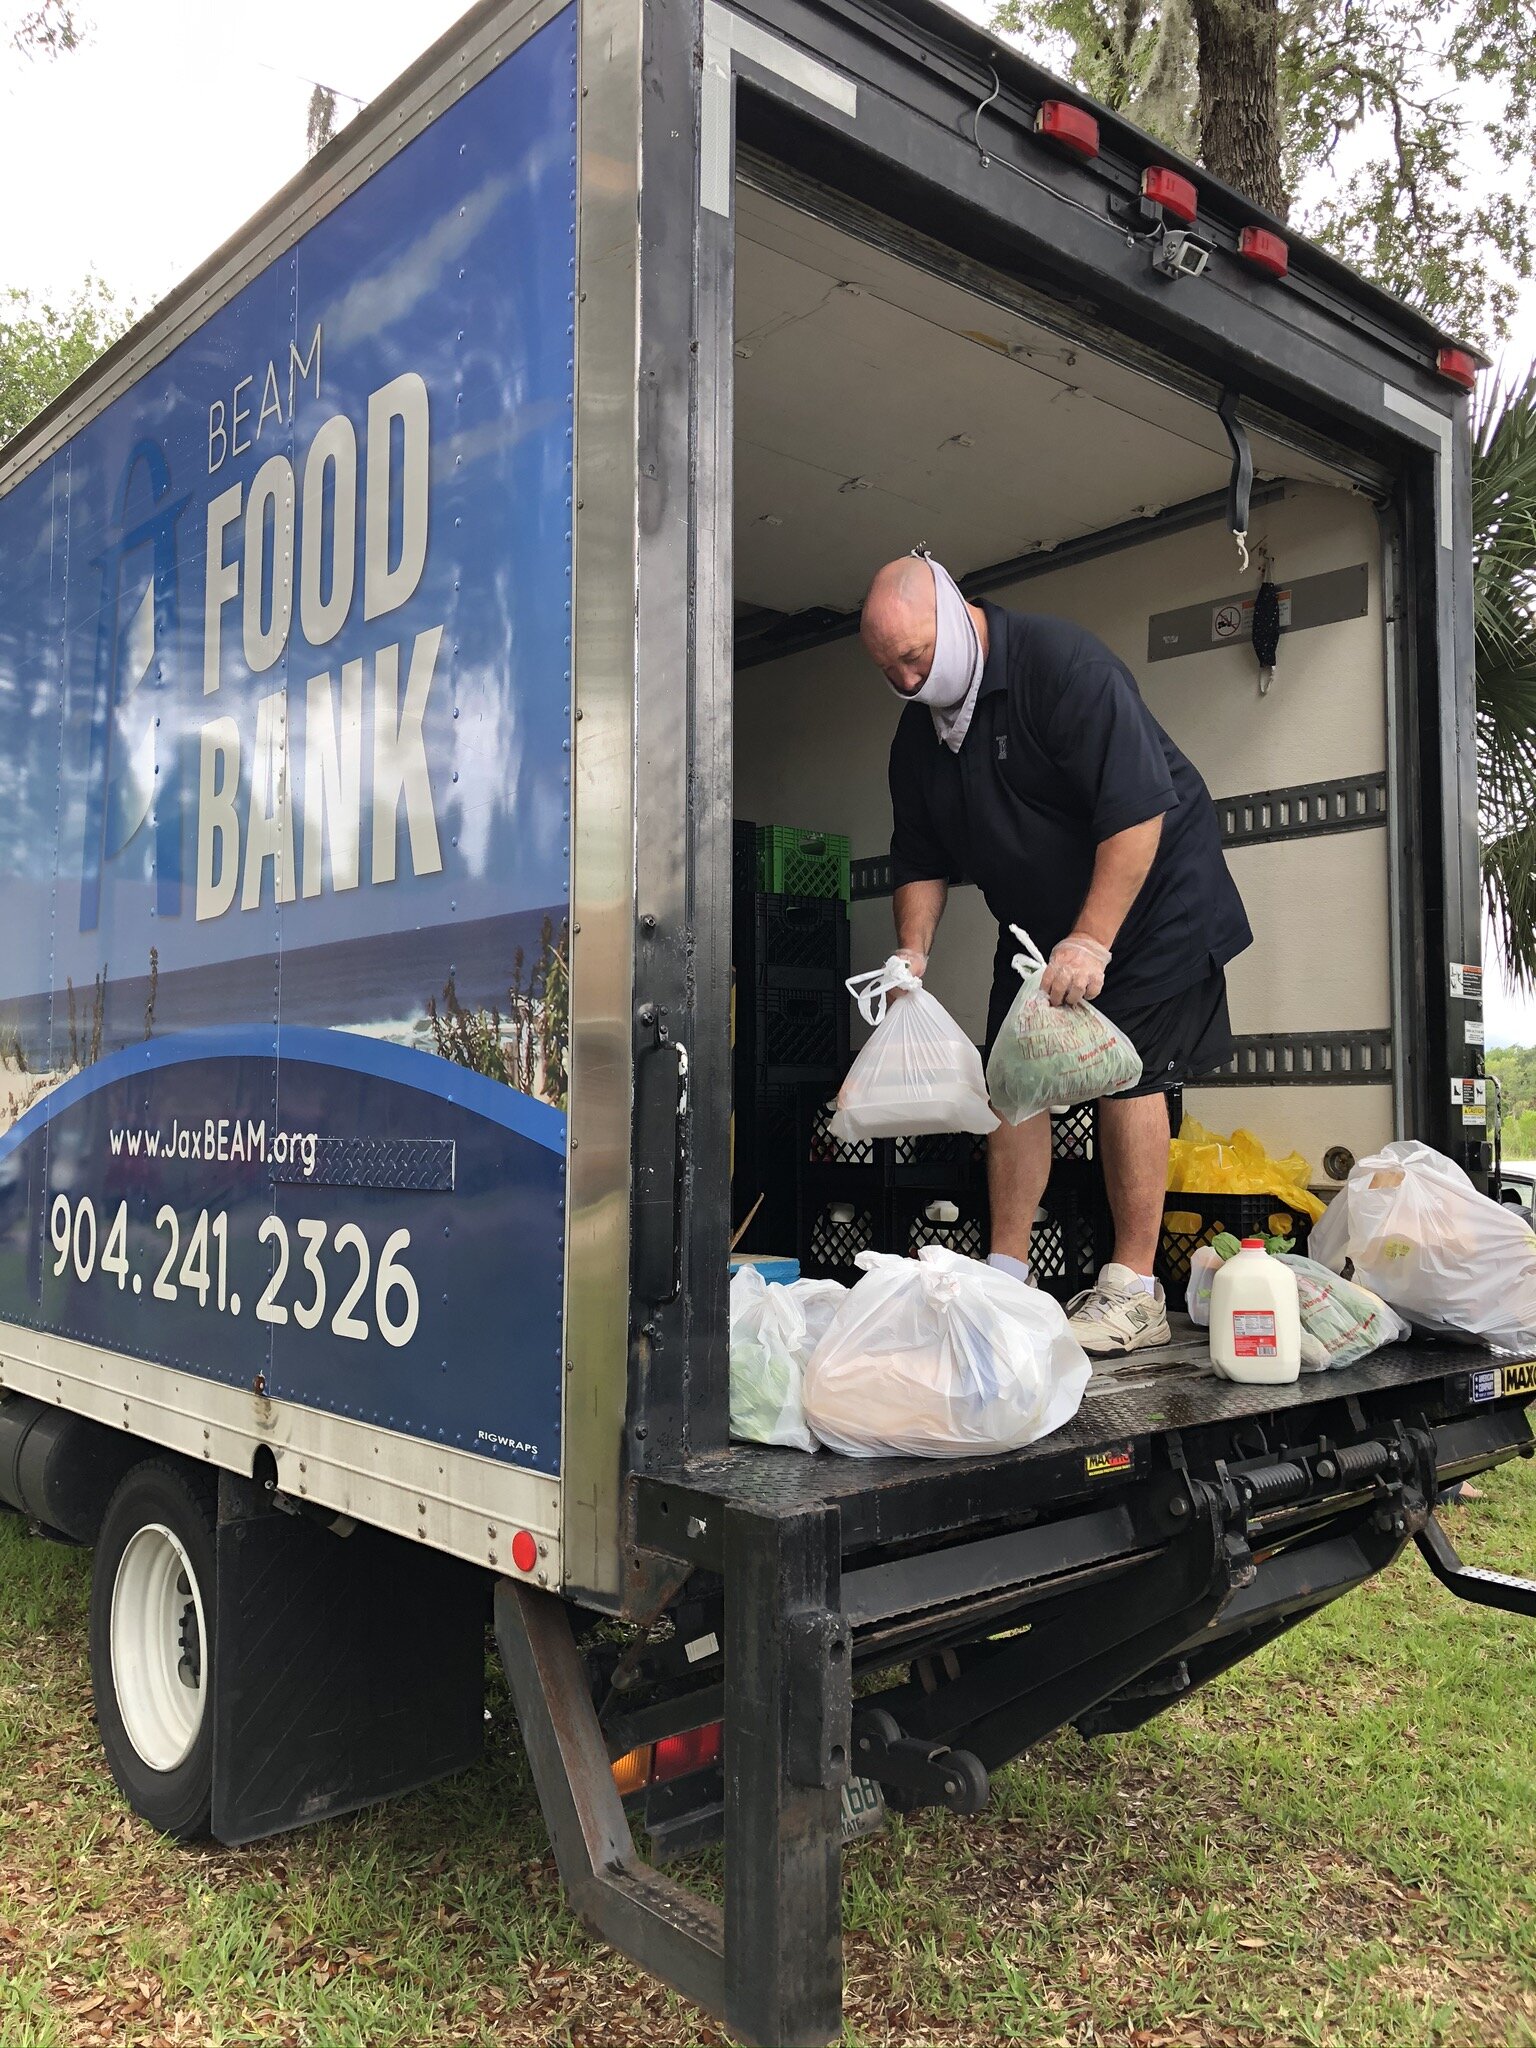 A Volunteer unloads groceries from the BEAM Food Bank Truck during Oak Harbour Baptist Church’ s Mobile Food Distribution.